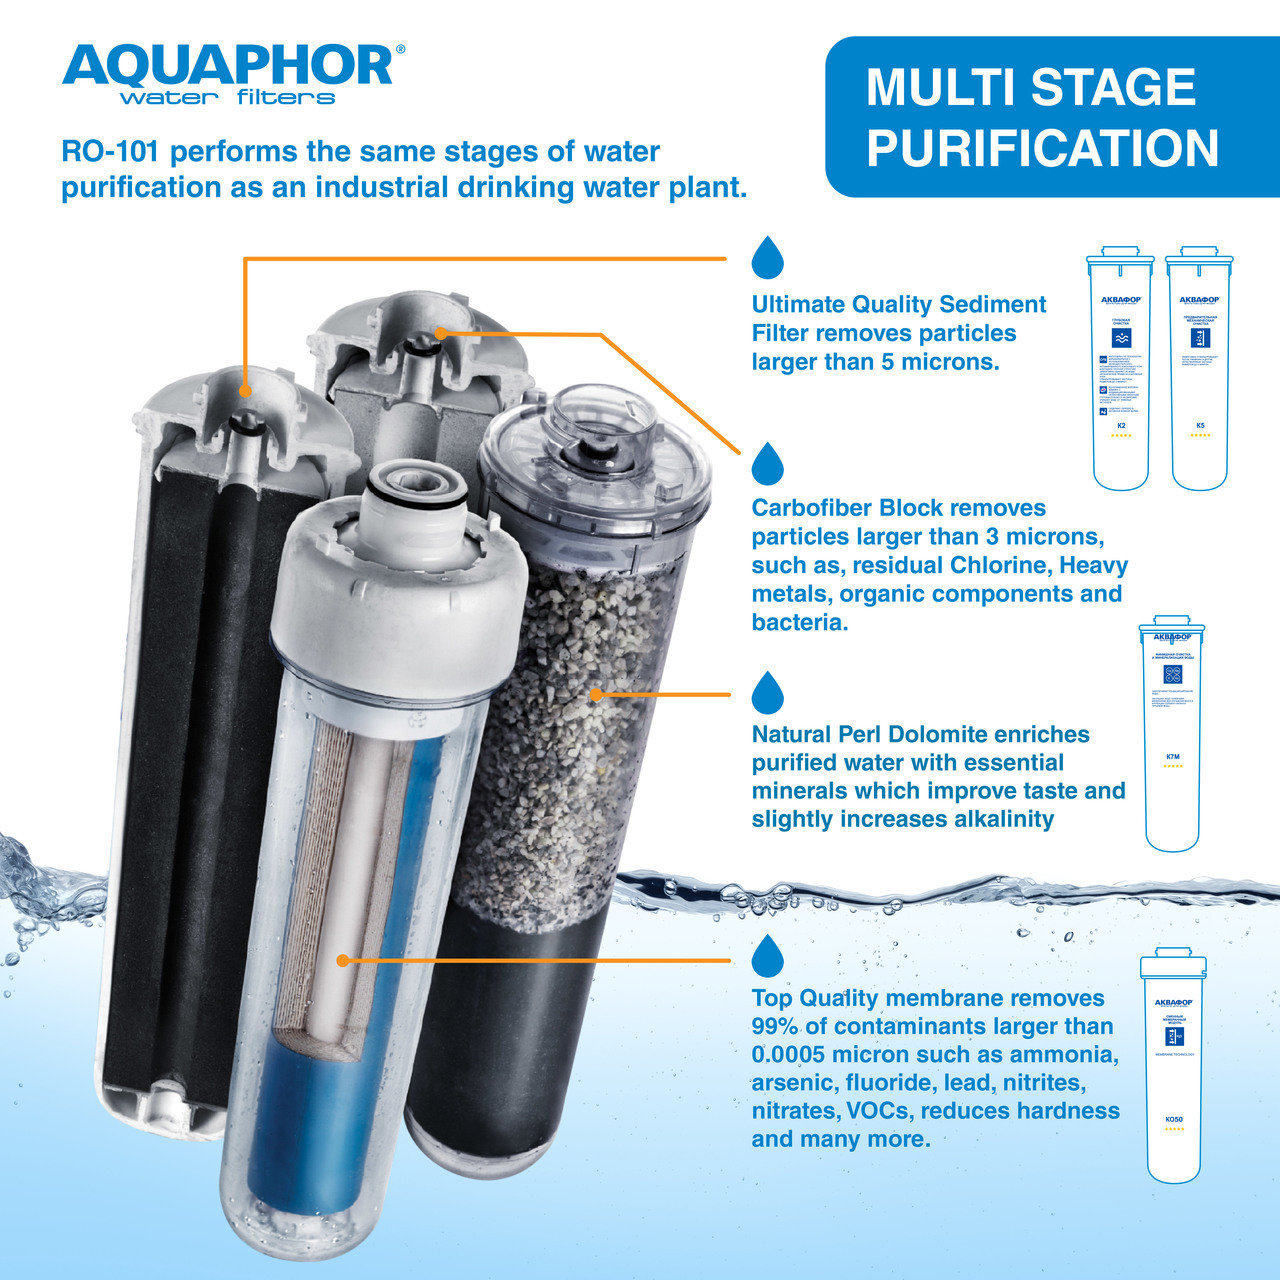 K7M Re Mineralizing Water Filter Cartridge Final Stage 